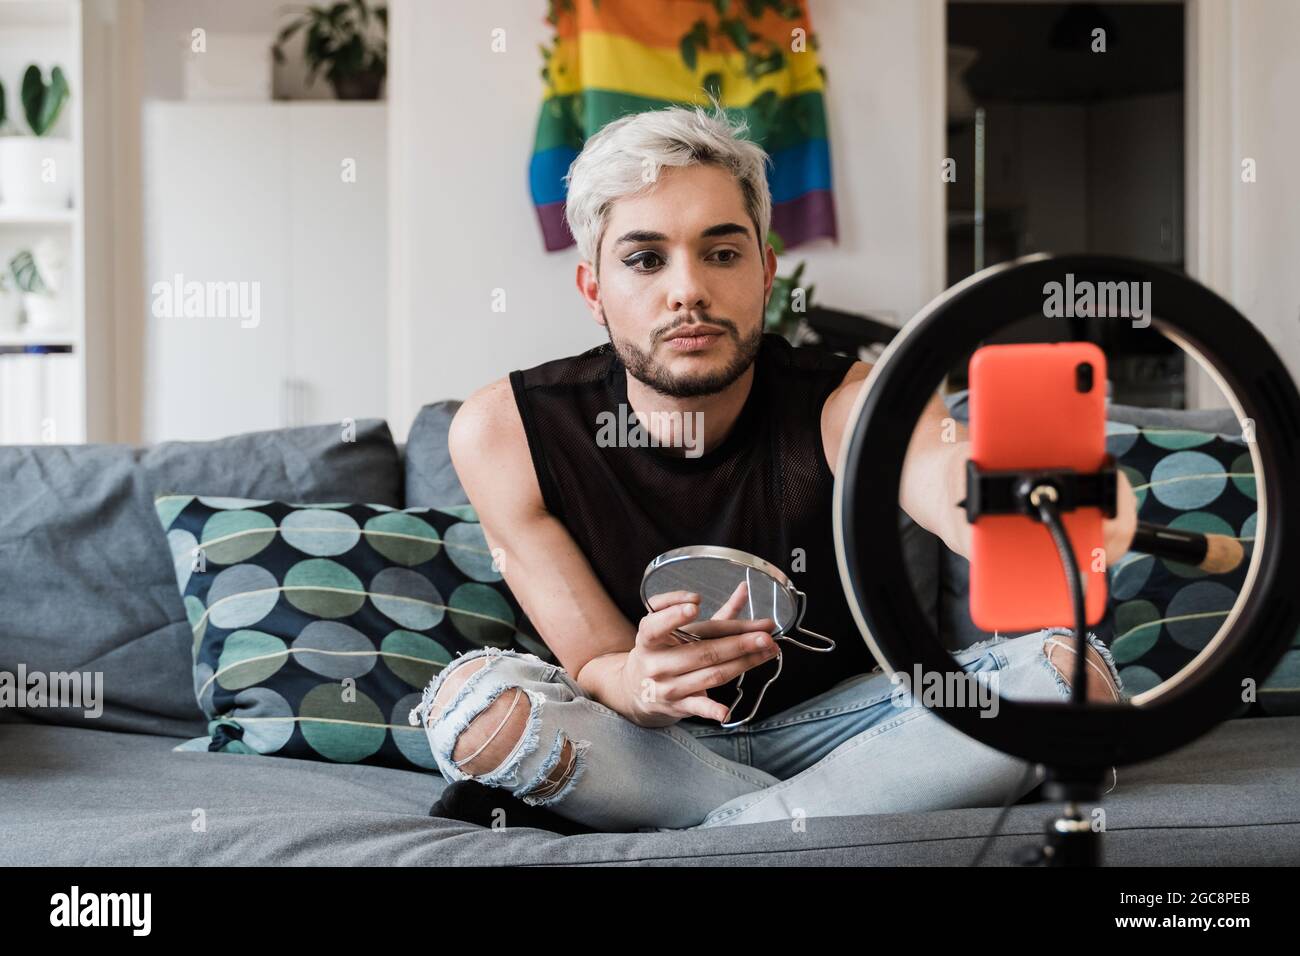 Gay man streaming online make up video tutorial with mobile phone indoors at home - Lgbt, drag queen, technology trendy concept - Focus in face Stock Photo